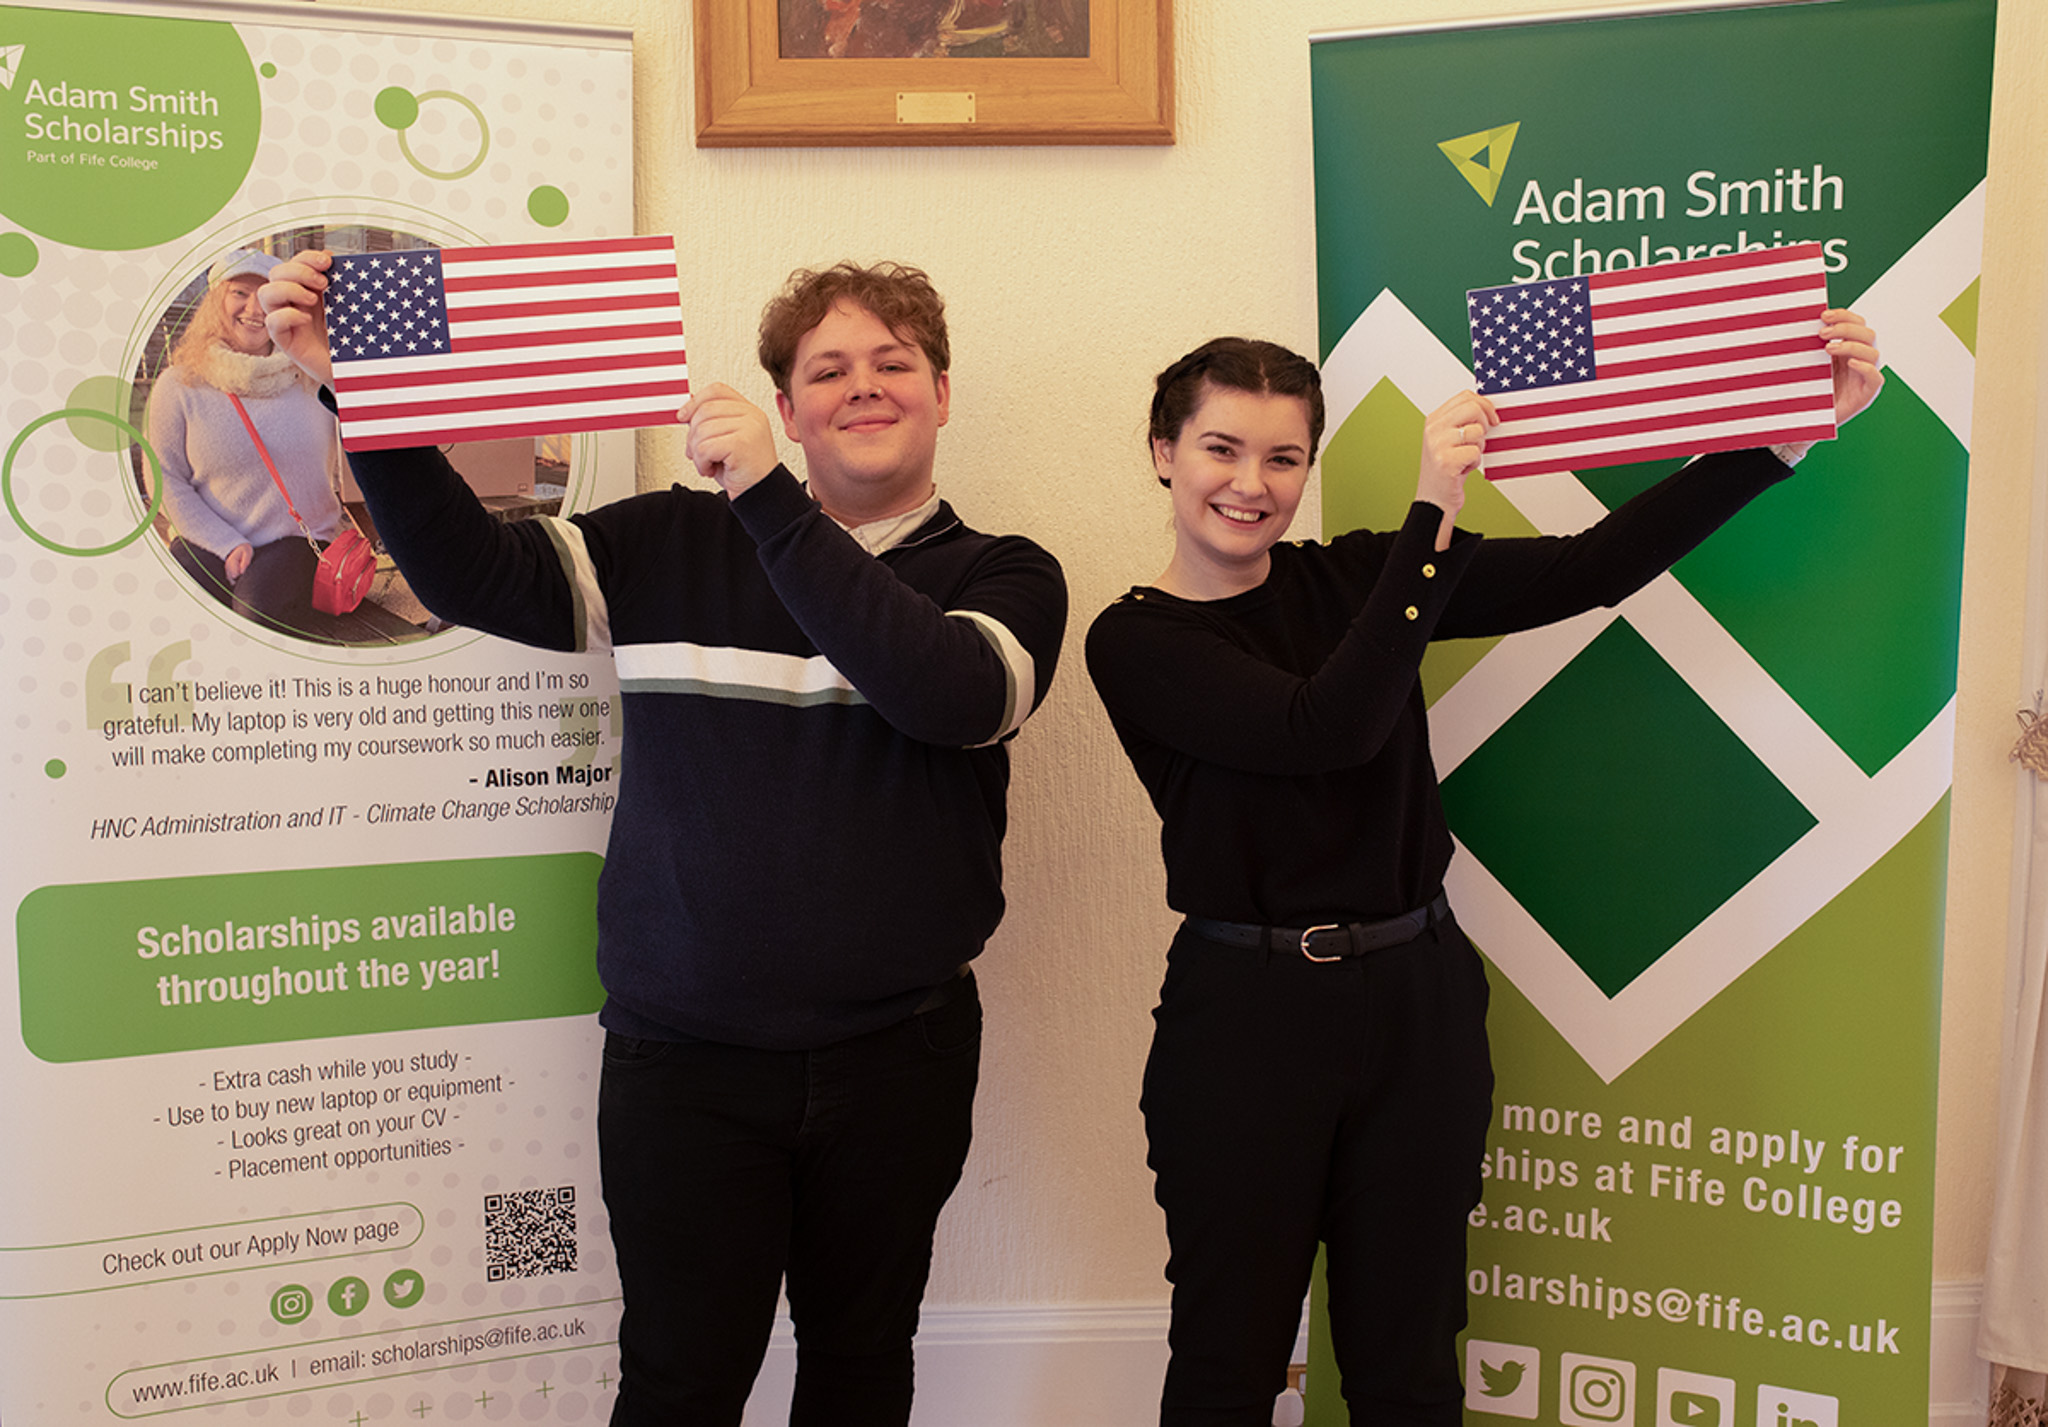 Students Julia and Ryan preparing for once-in-a-lifetime trips to the USA